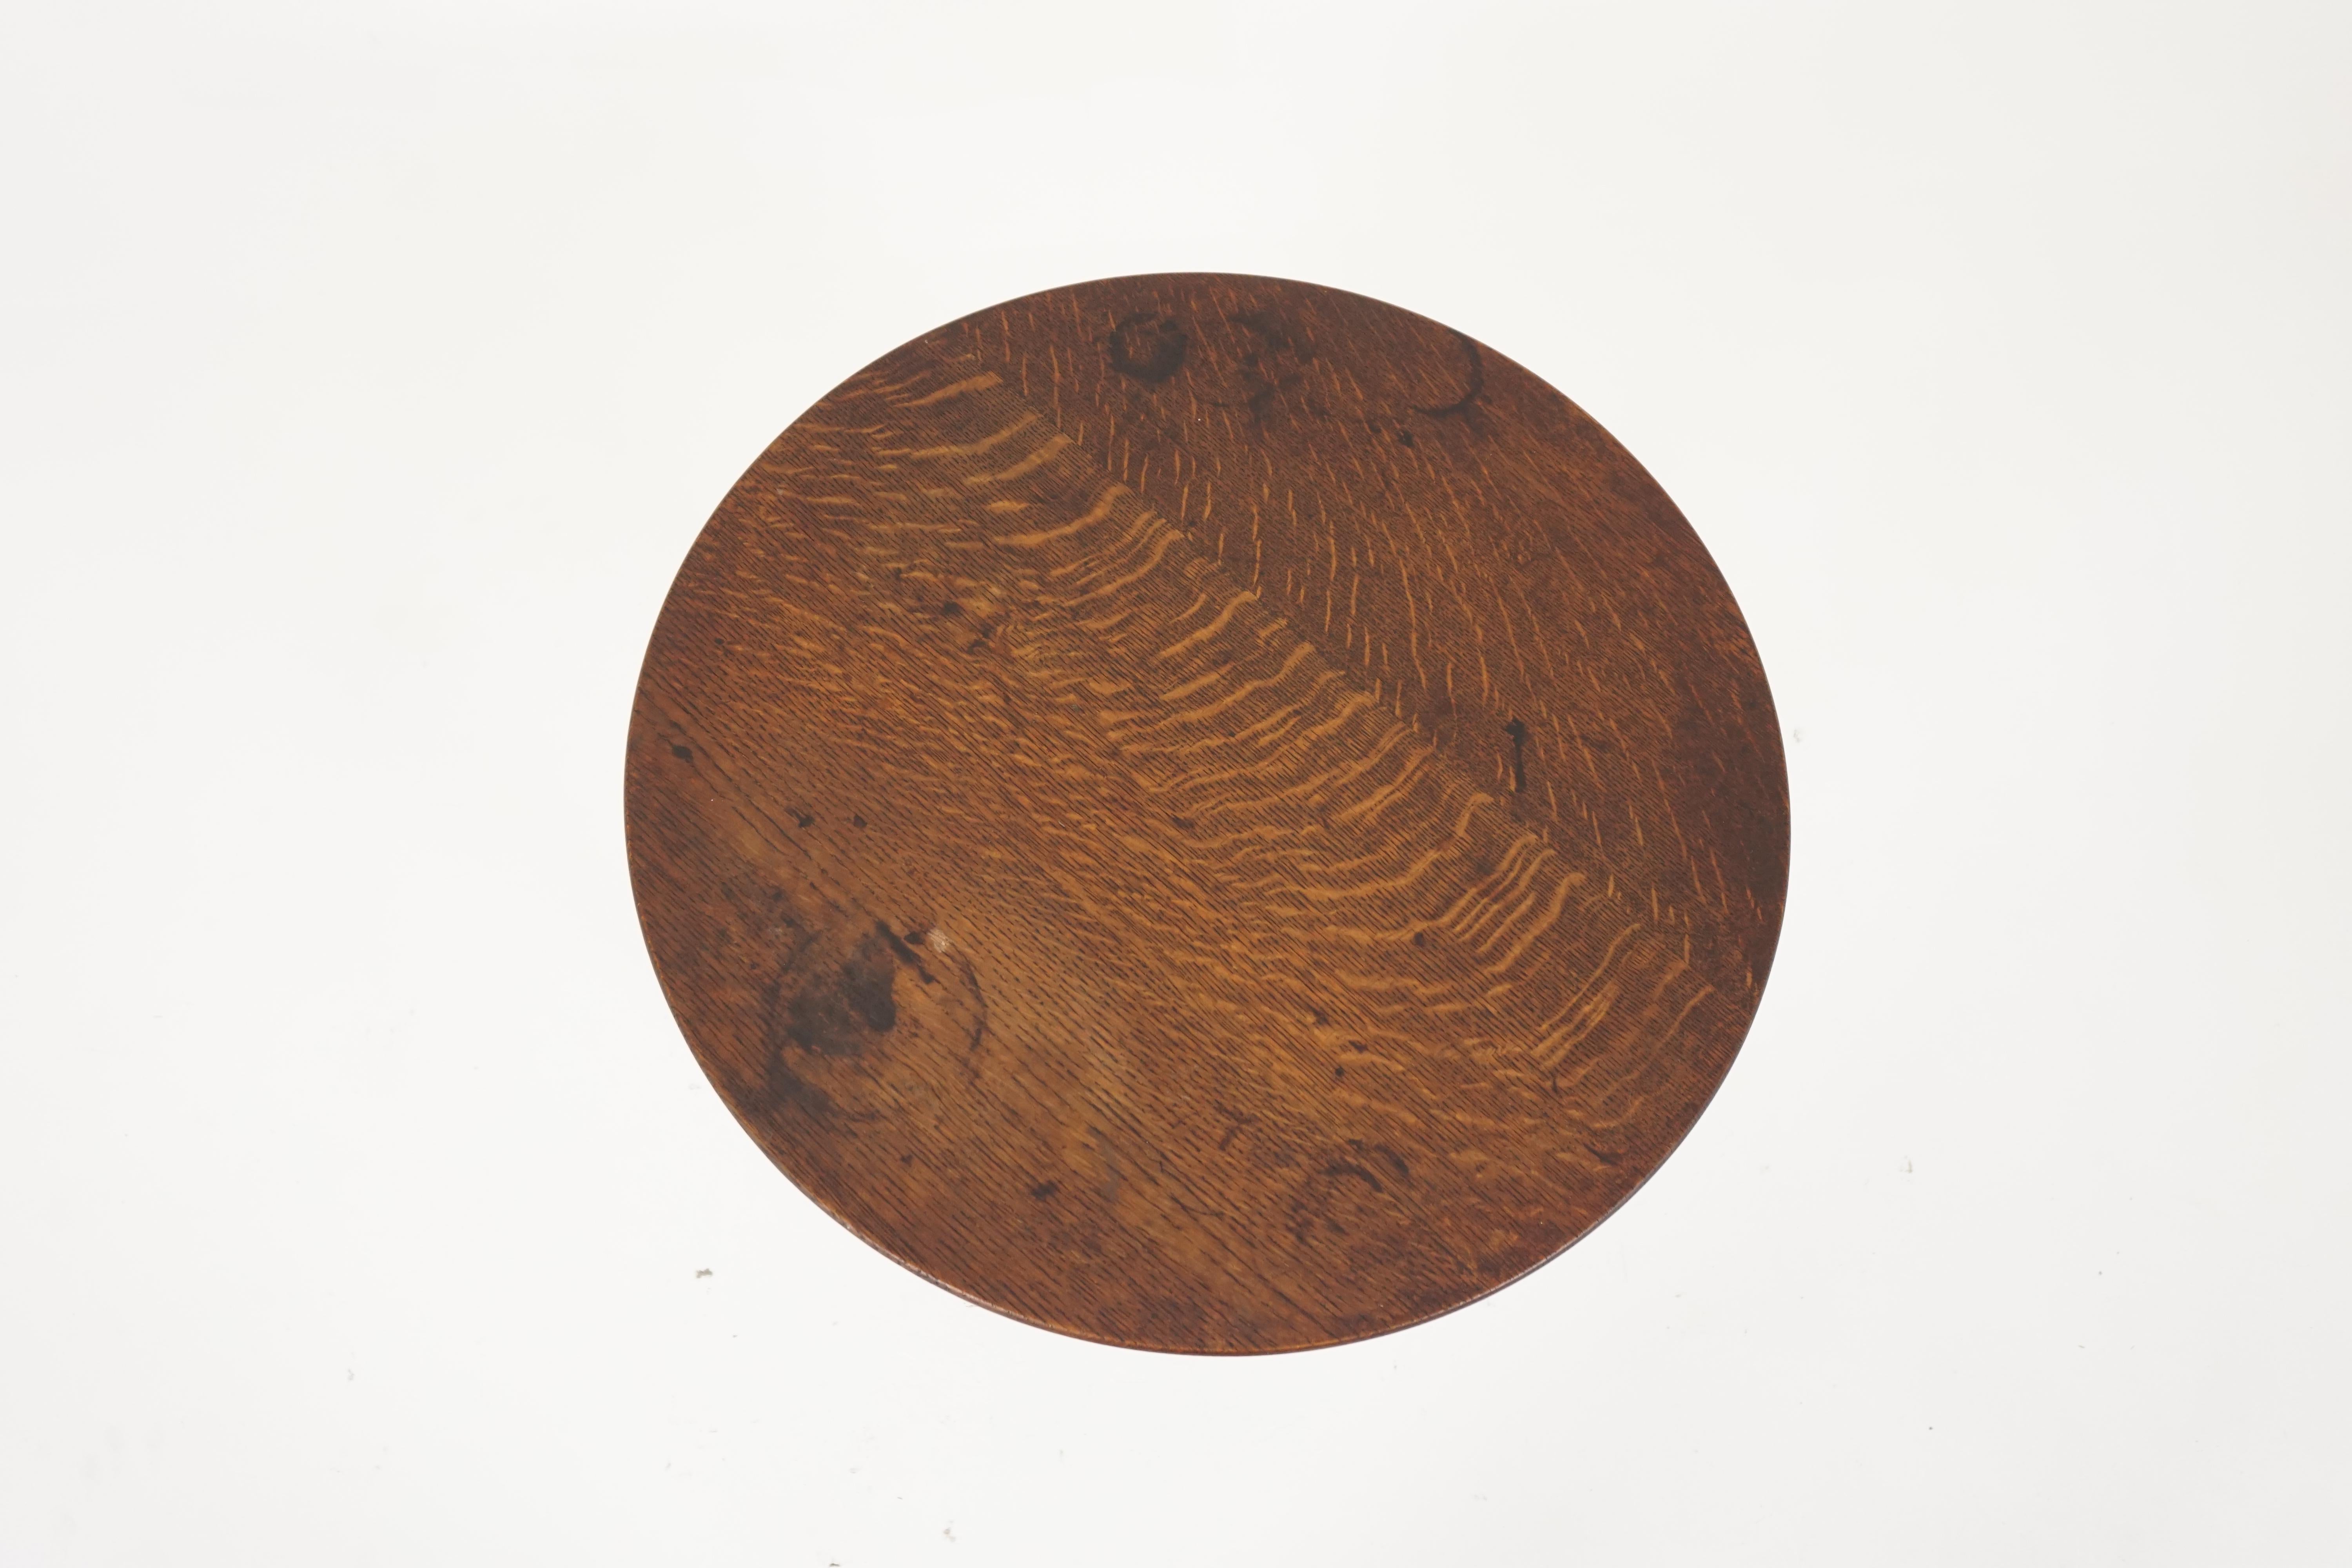 Antique circular tiger oak barley twist lamp/end table, Scotland 1920, B1921

Scotland, 1920
Solid oak
Original finish
Circular top
Four barley twist legs
Connected with cross stretchers
All joints are tight

B1921

Measures: 22